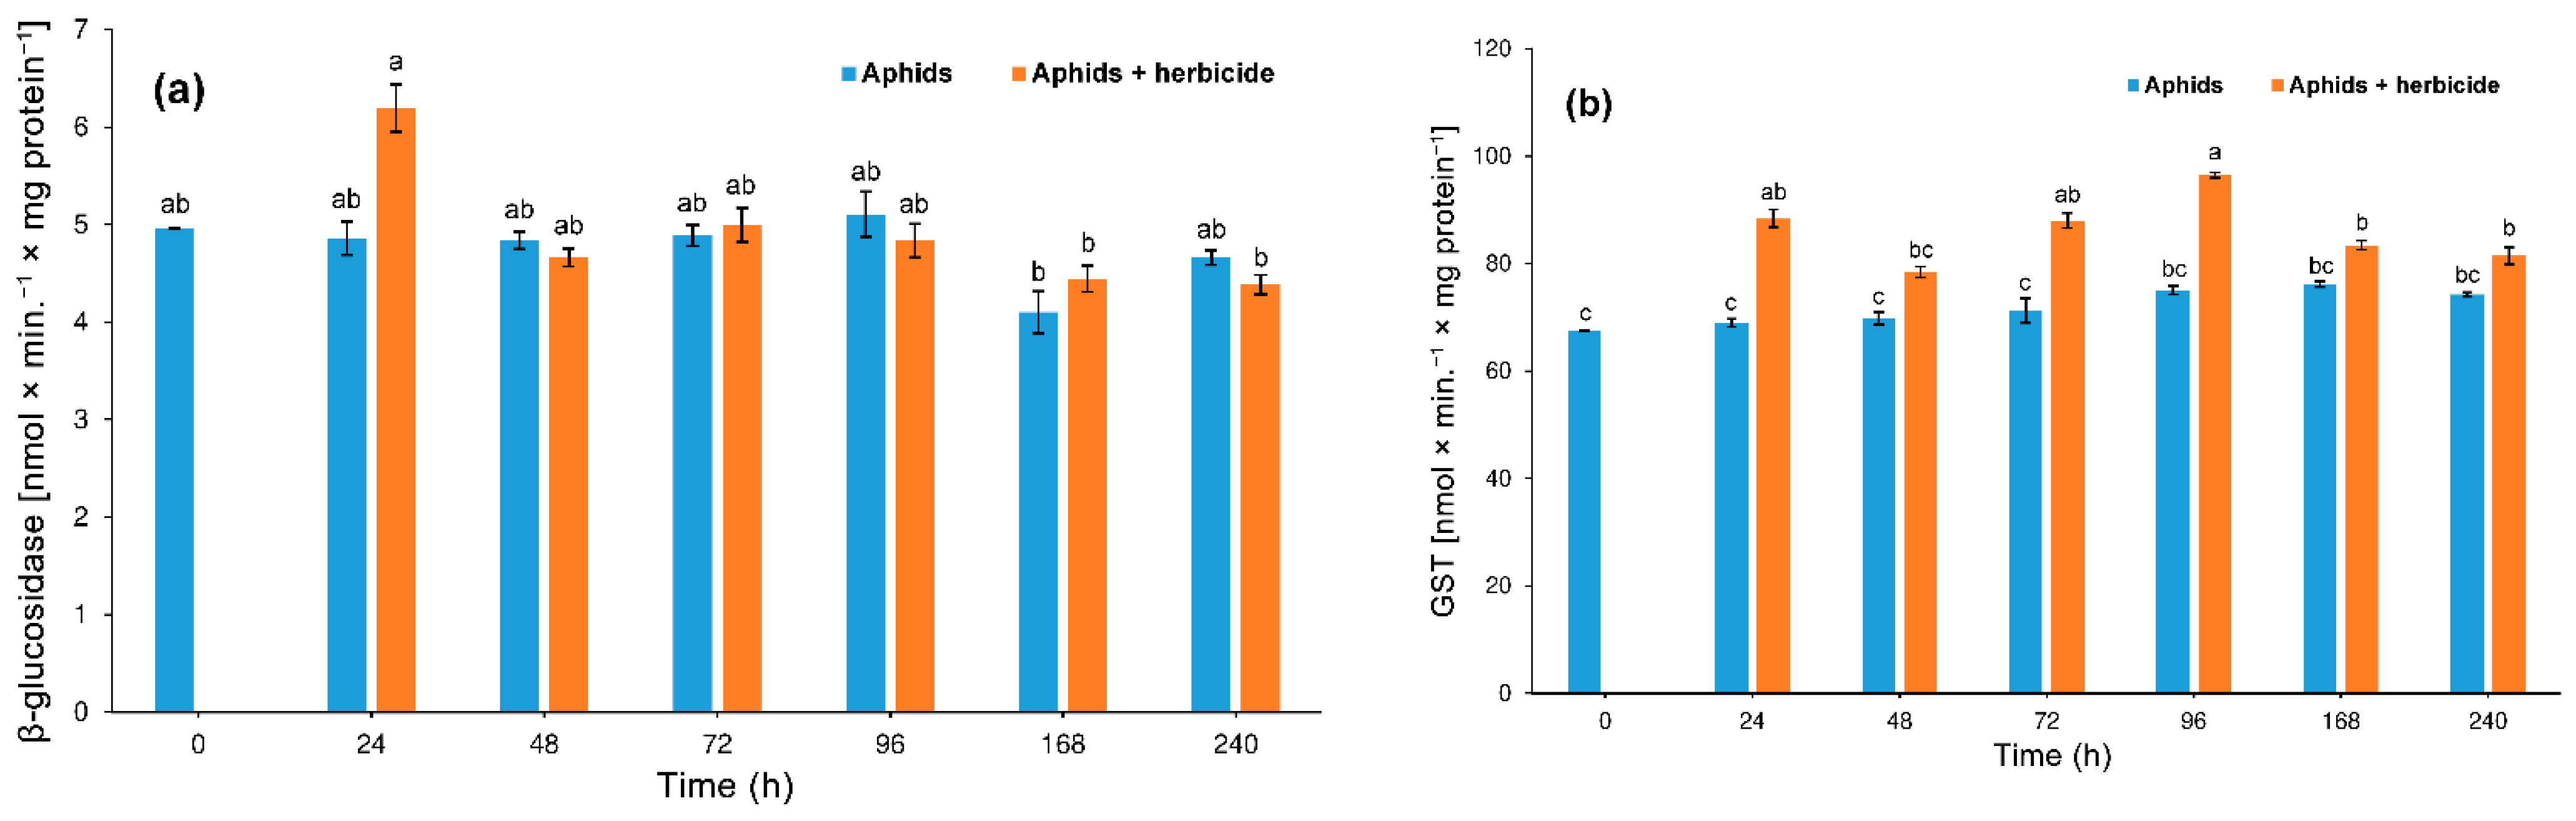 Insects | Free Full-Text | Mild Abiotic Stress Affects Development and  Stimulates Hormesis of Hemp Aphid Phorodon cannabis